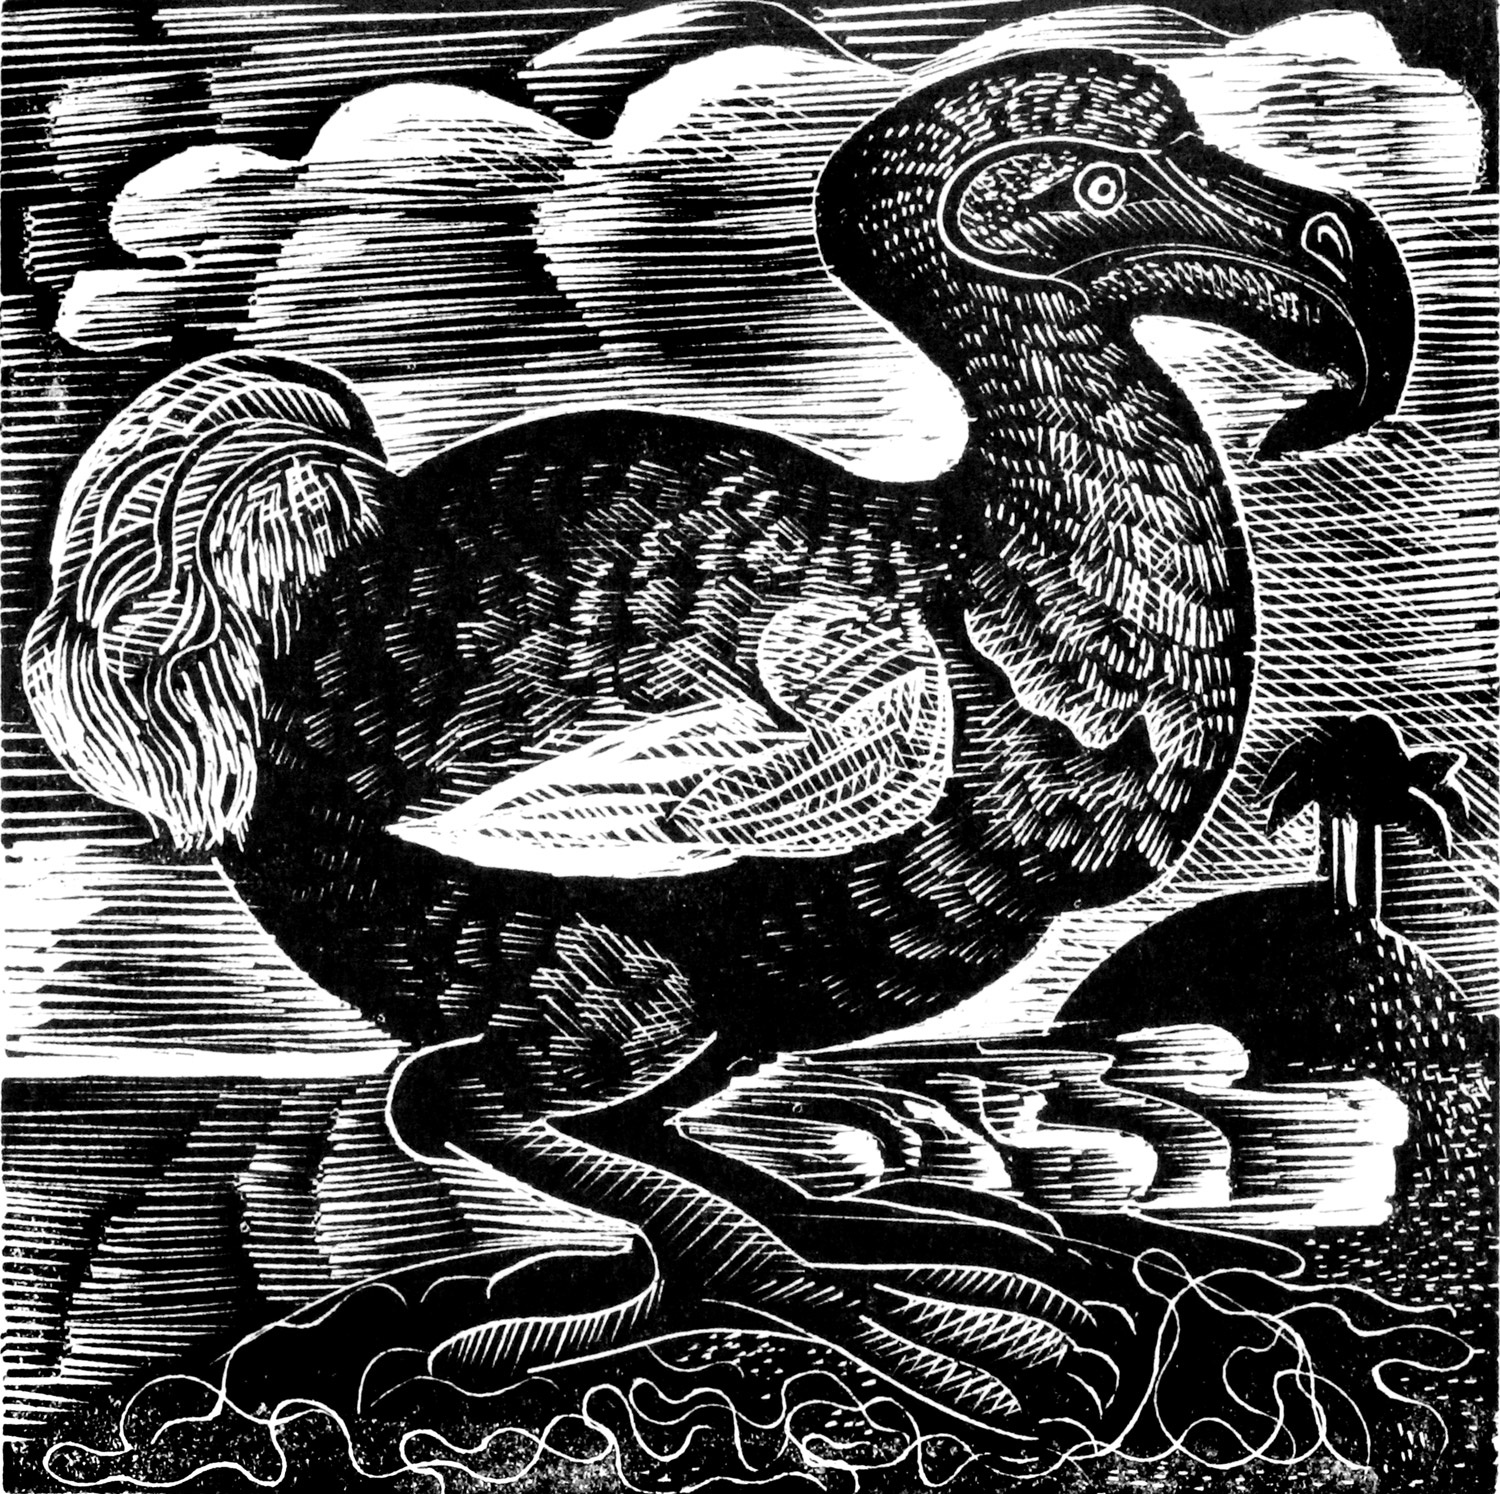 X is for Dodo by Angela Harding